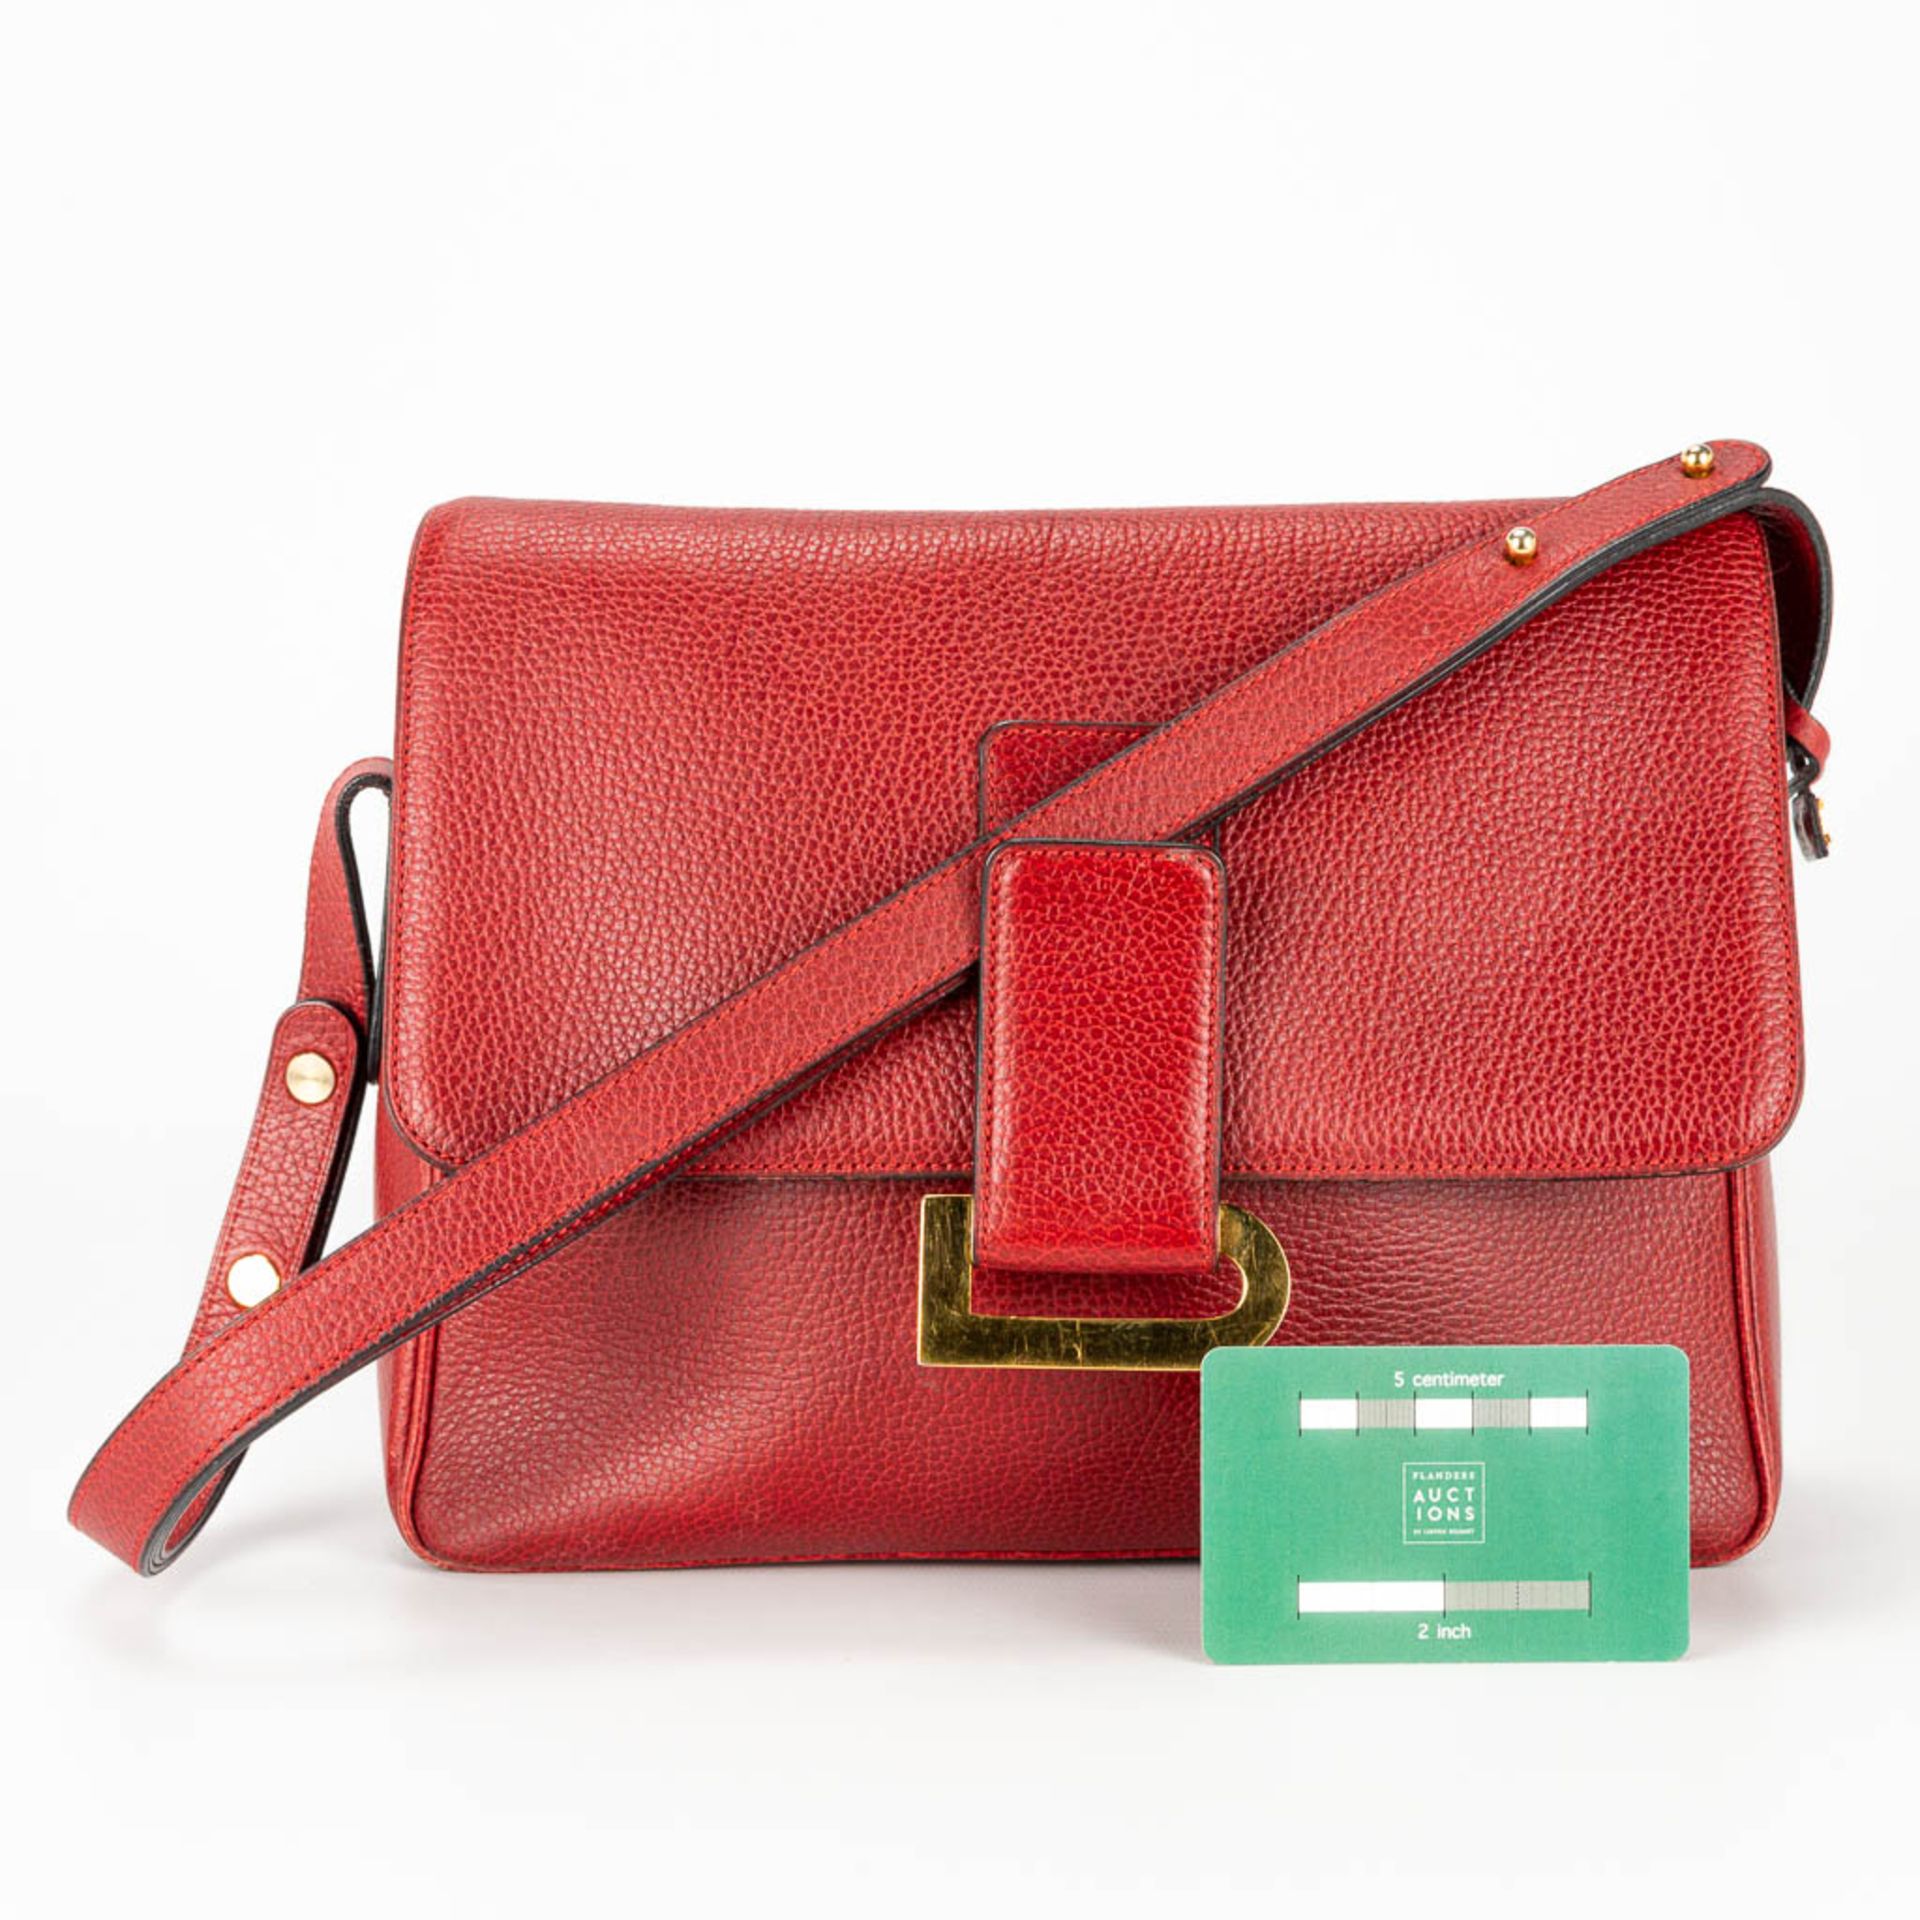 A purse made of red leather and marked Delvaux. - Image 5 of 16